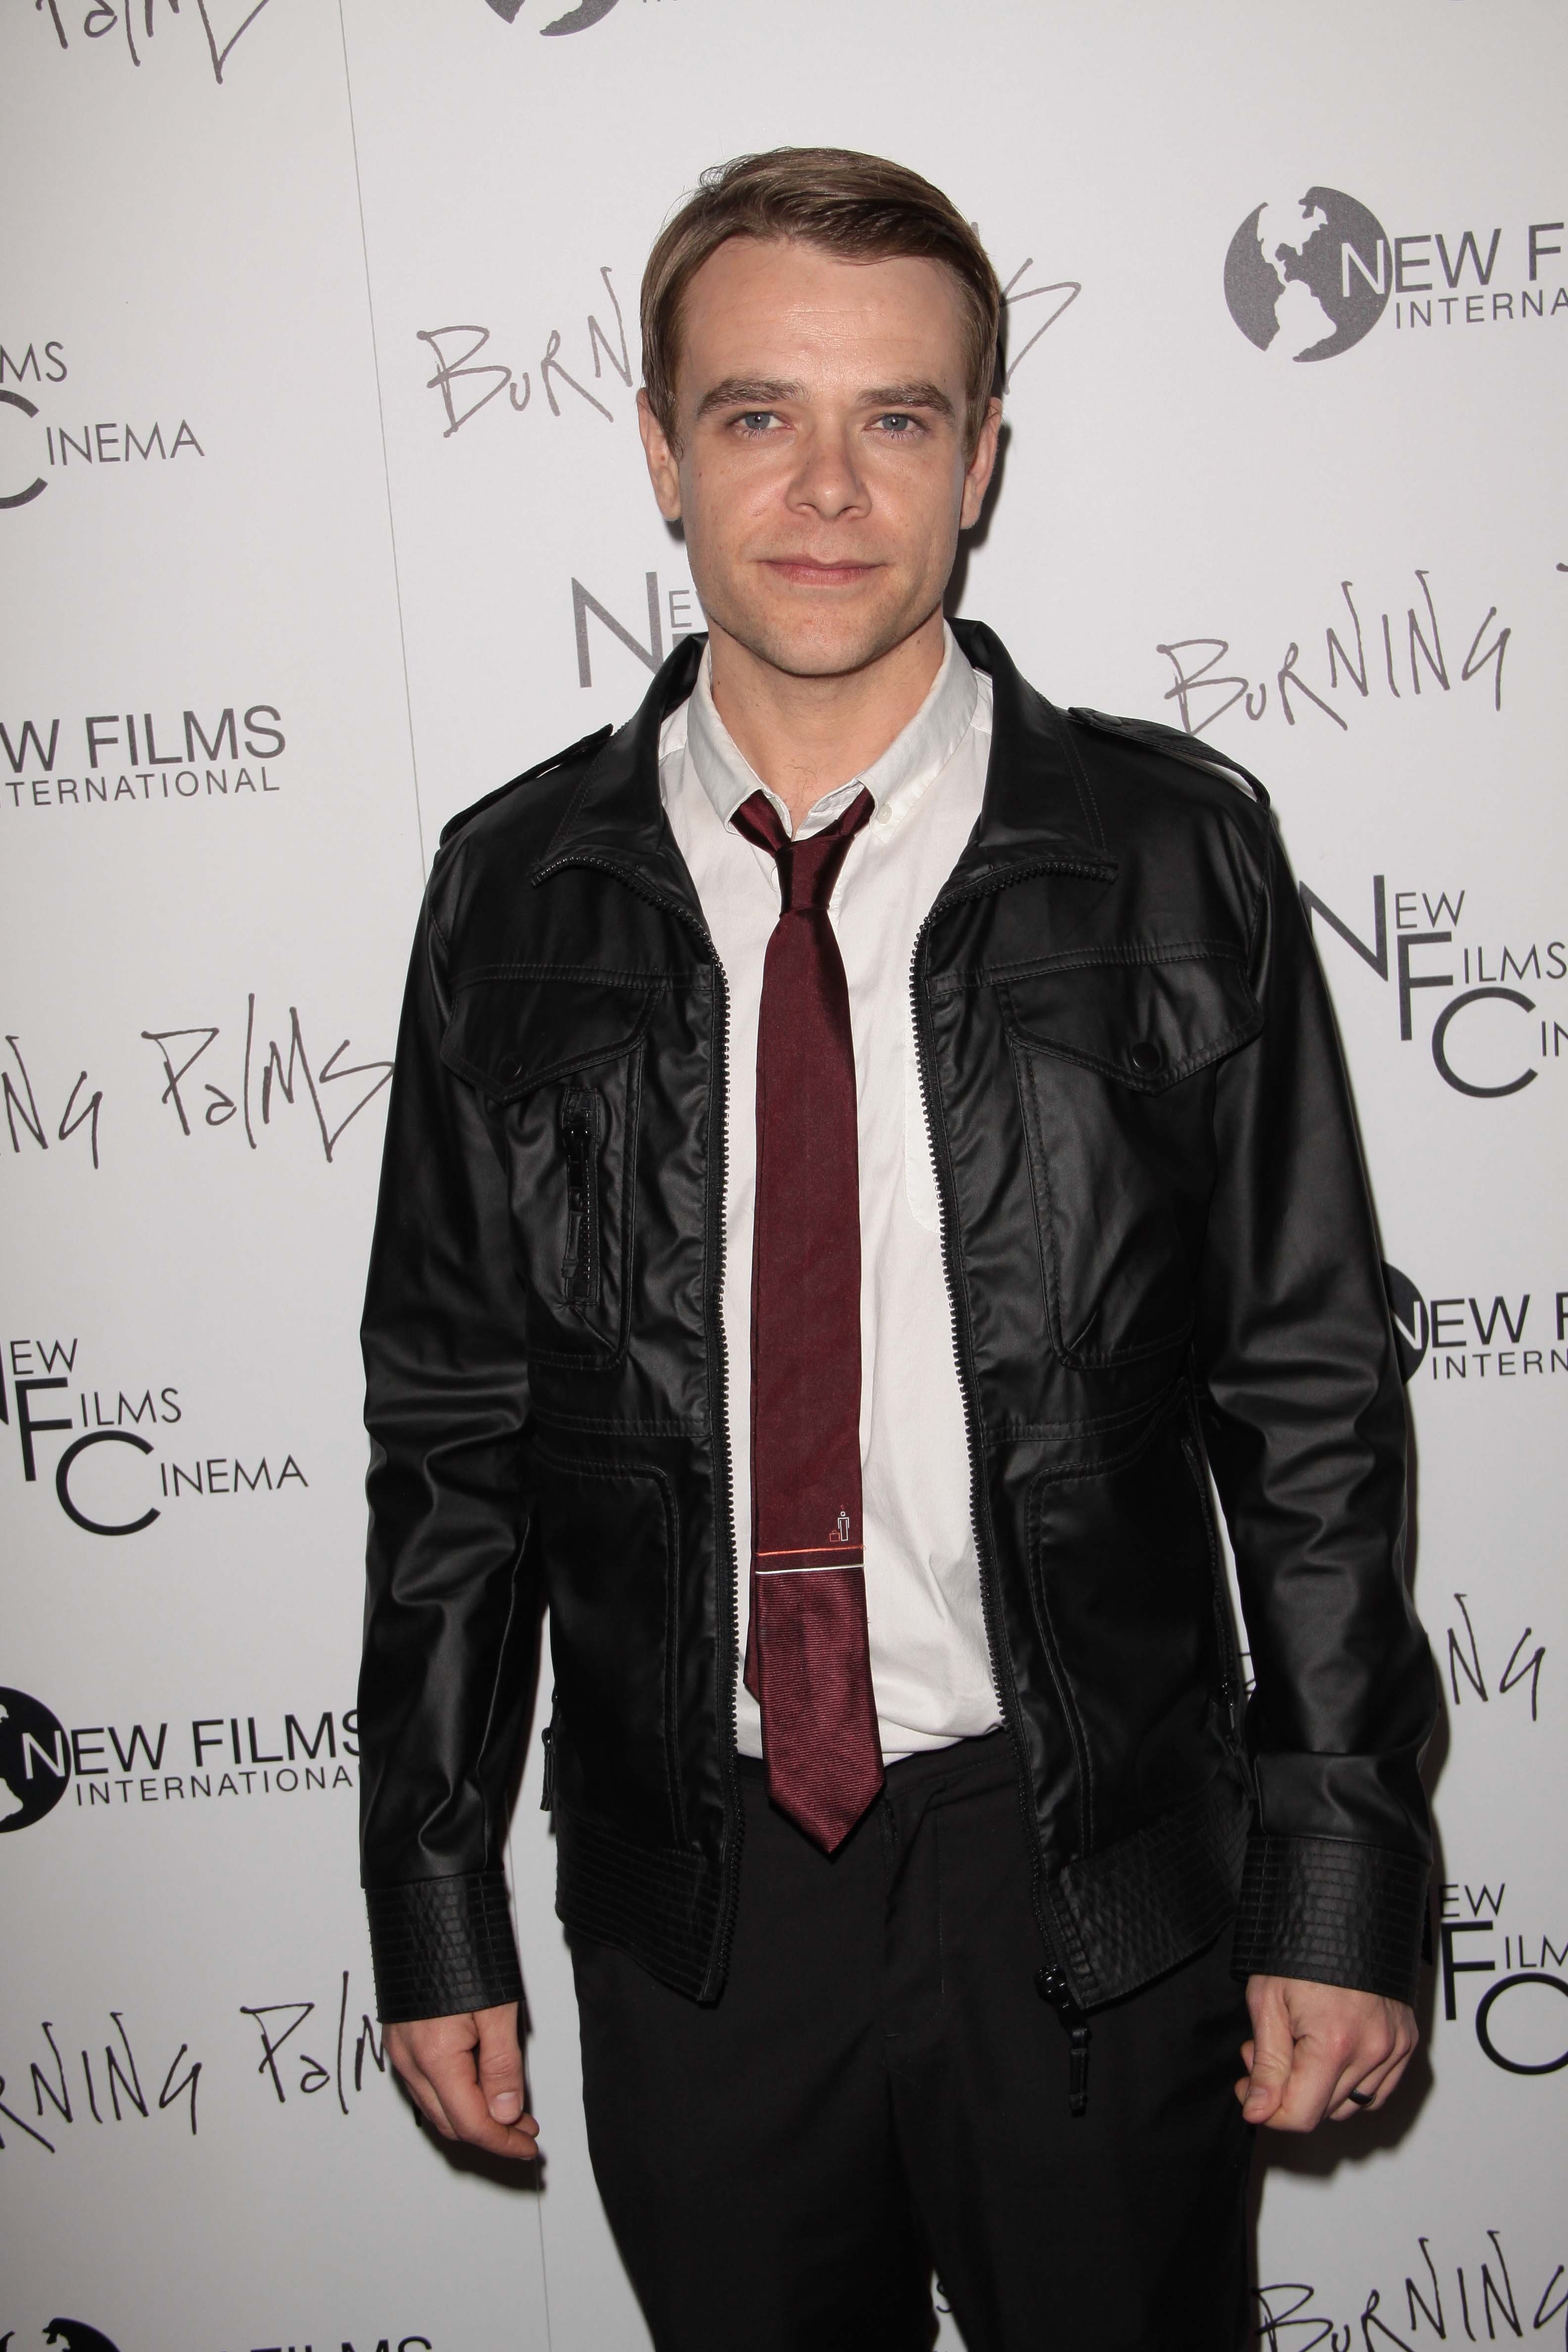 Nick Stahl at the "Burning Palms" Los Angeles Premiere, ArcLight Cinemas, Hollywood on January 12, 2011 in California | Photo: Shutterstock